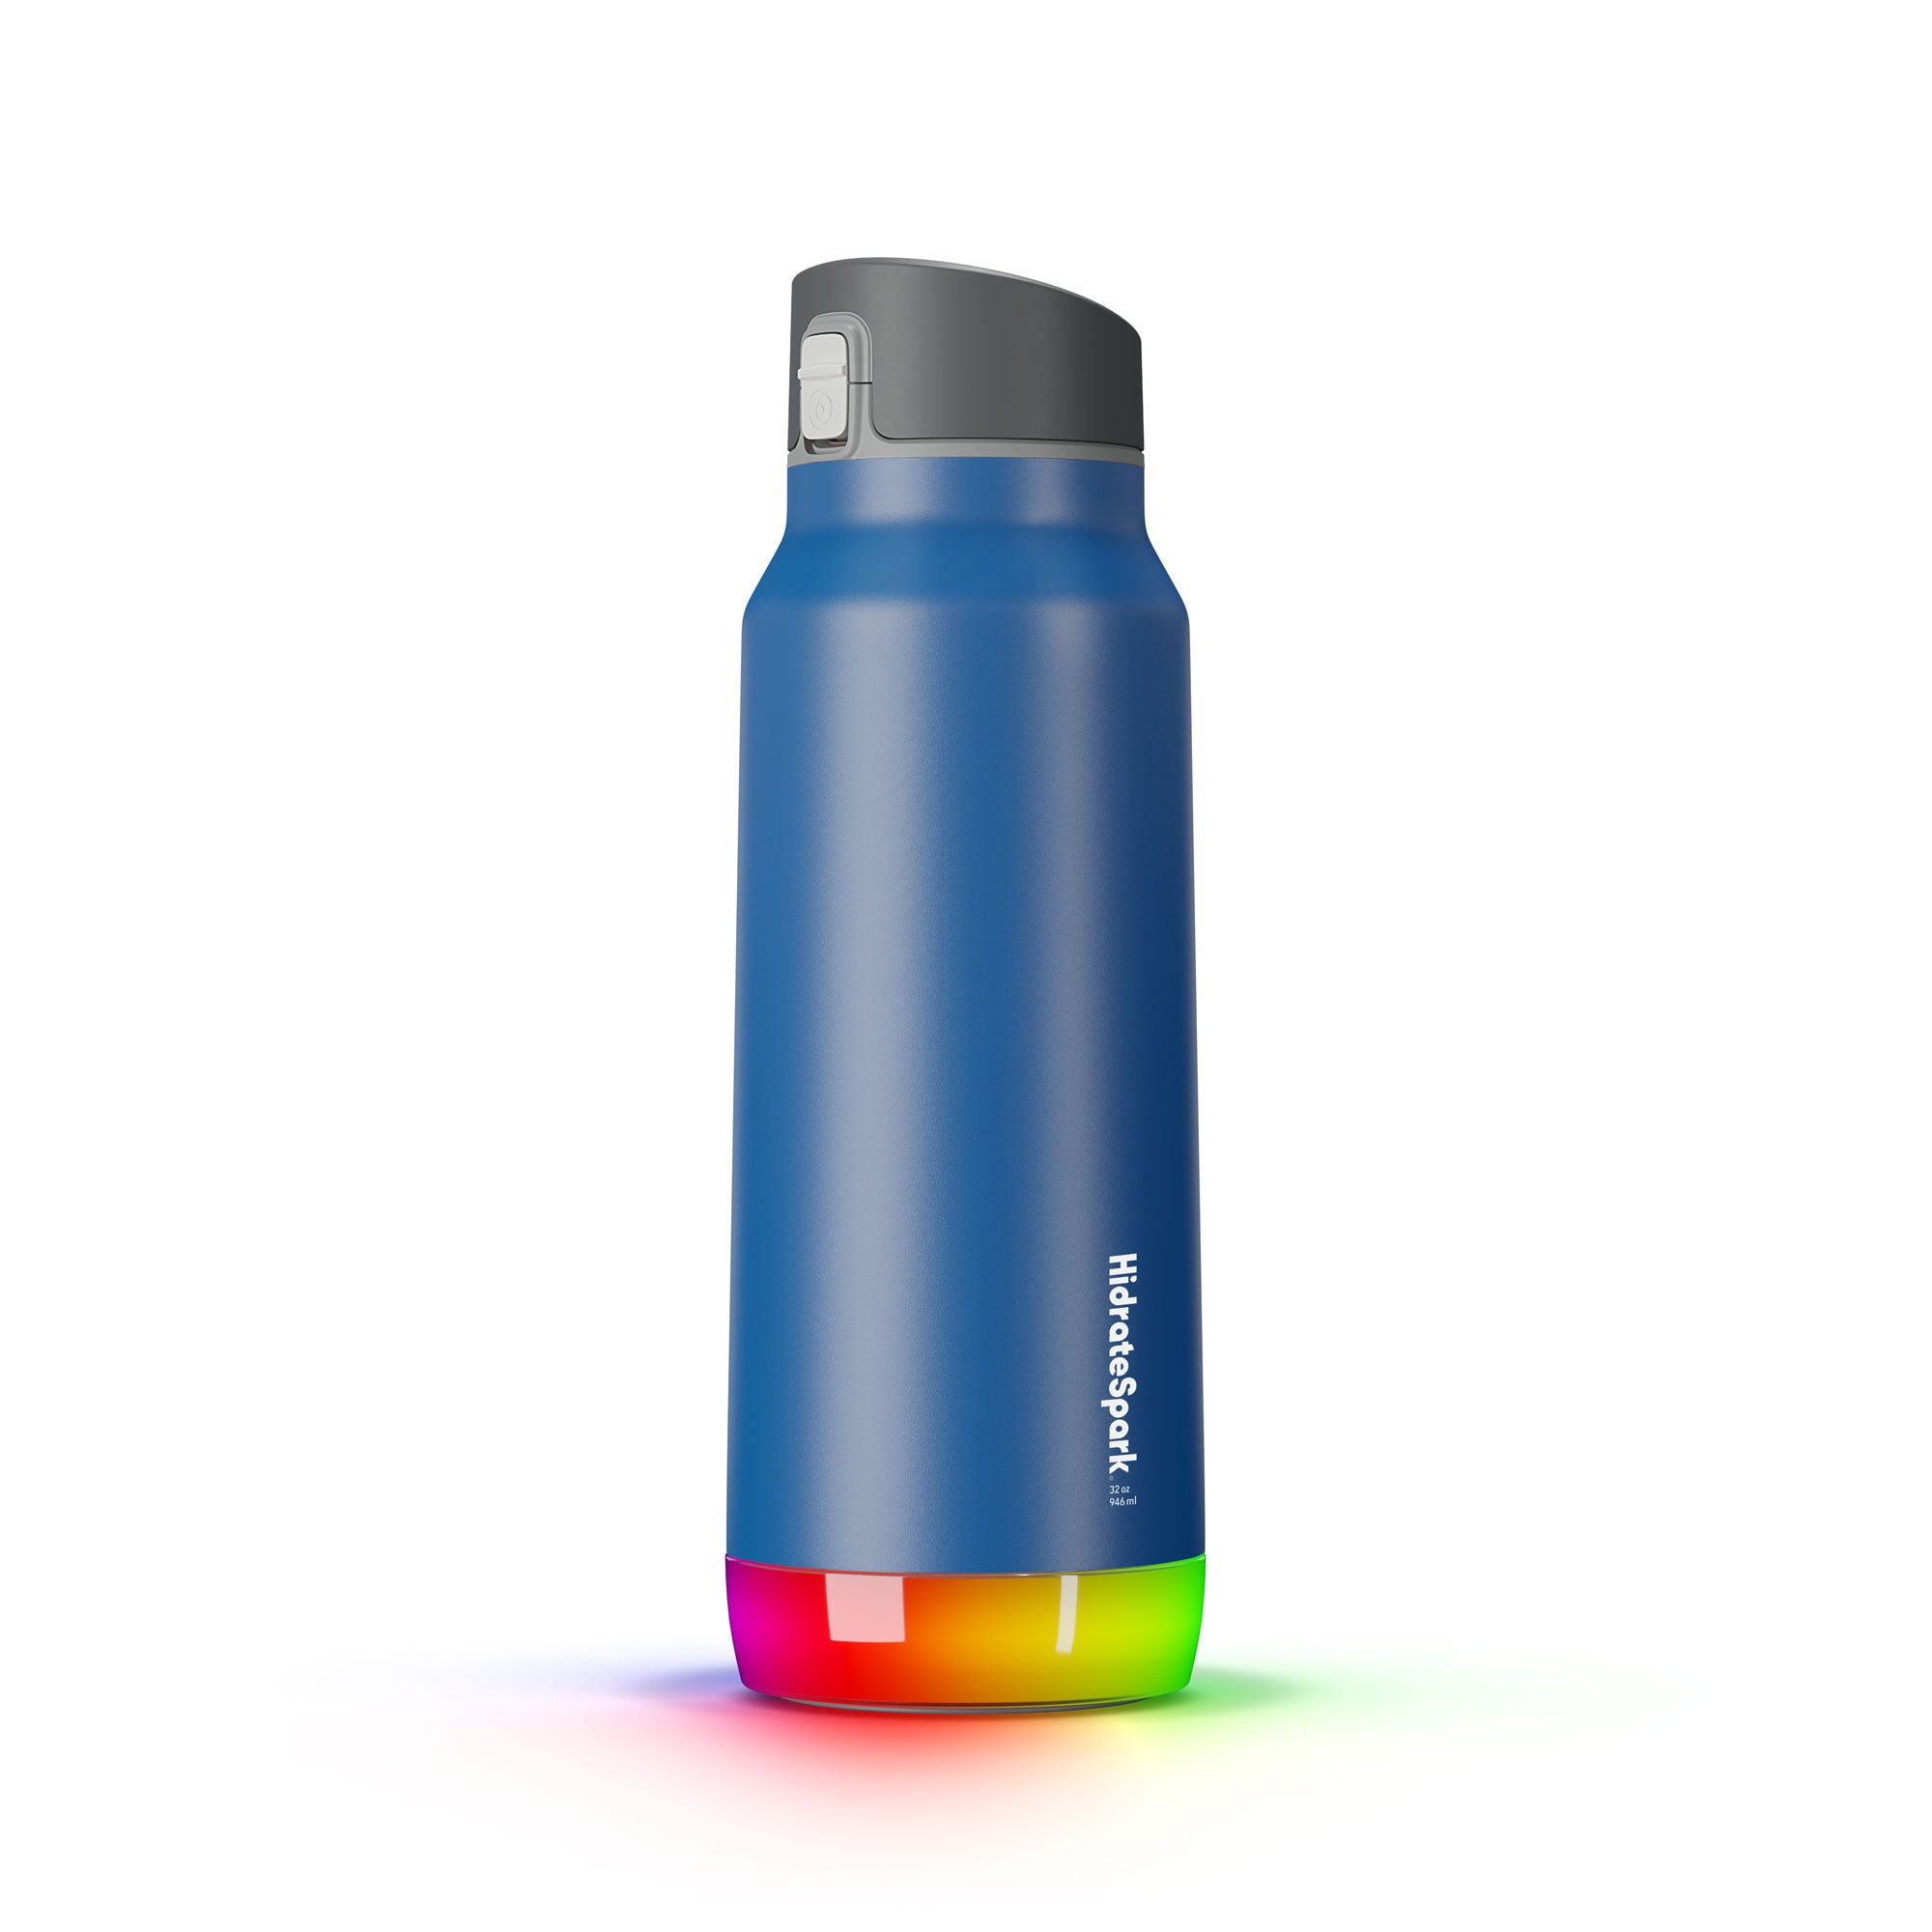 Rechargeable Spray Bottle 32oz, Products